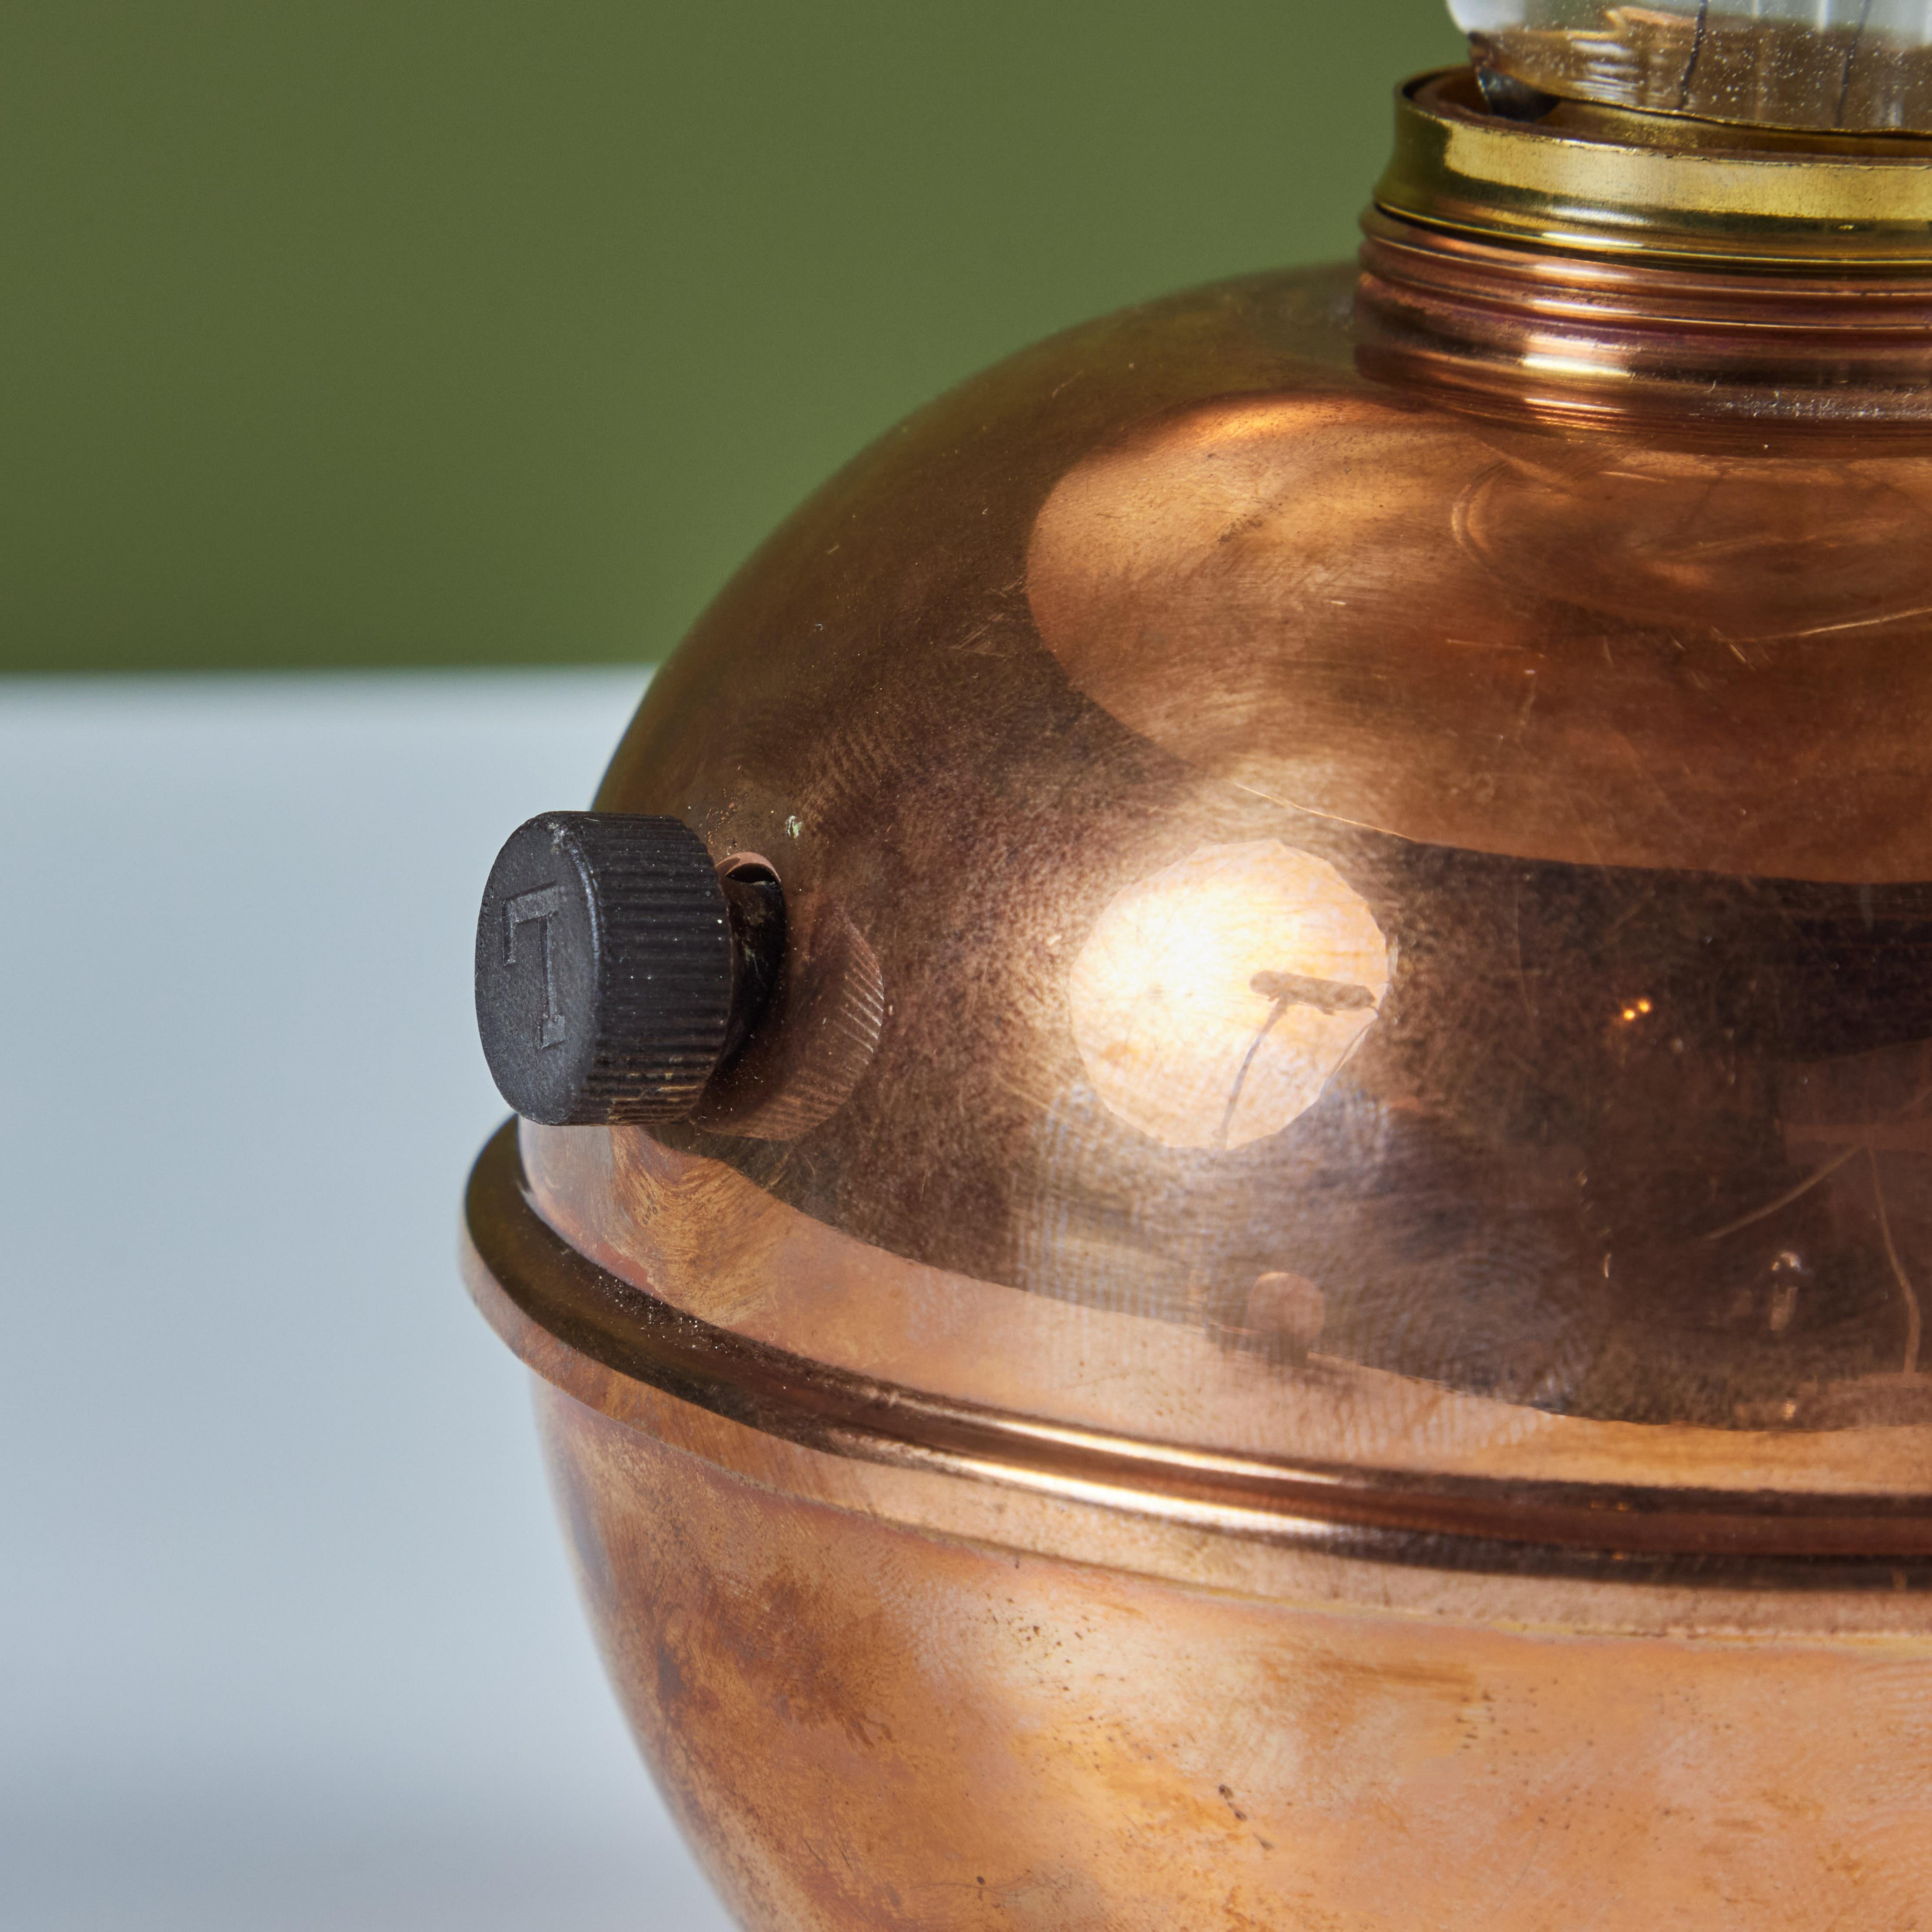 Copper Glow Lamp by Ruth Gerth for Chase 3